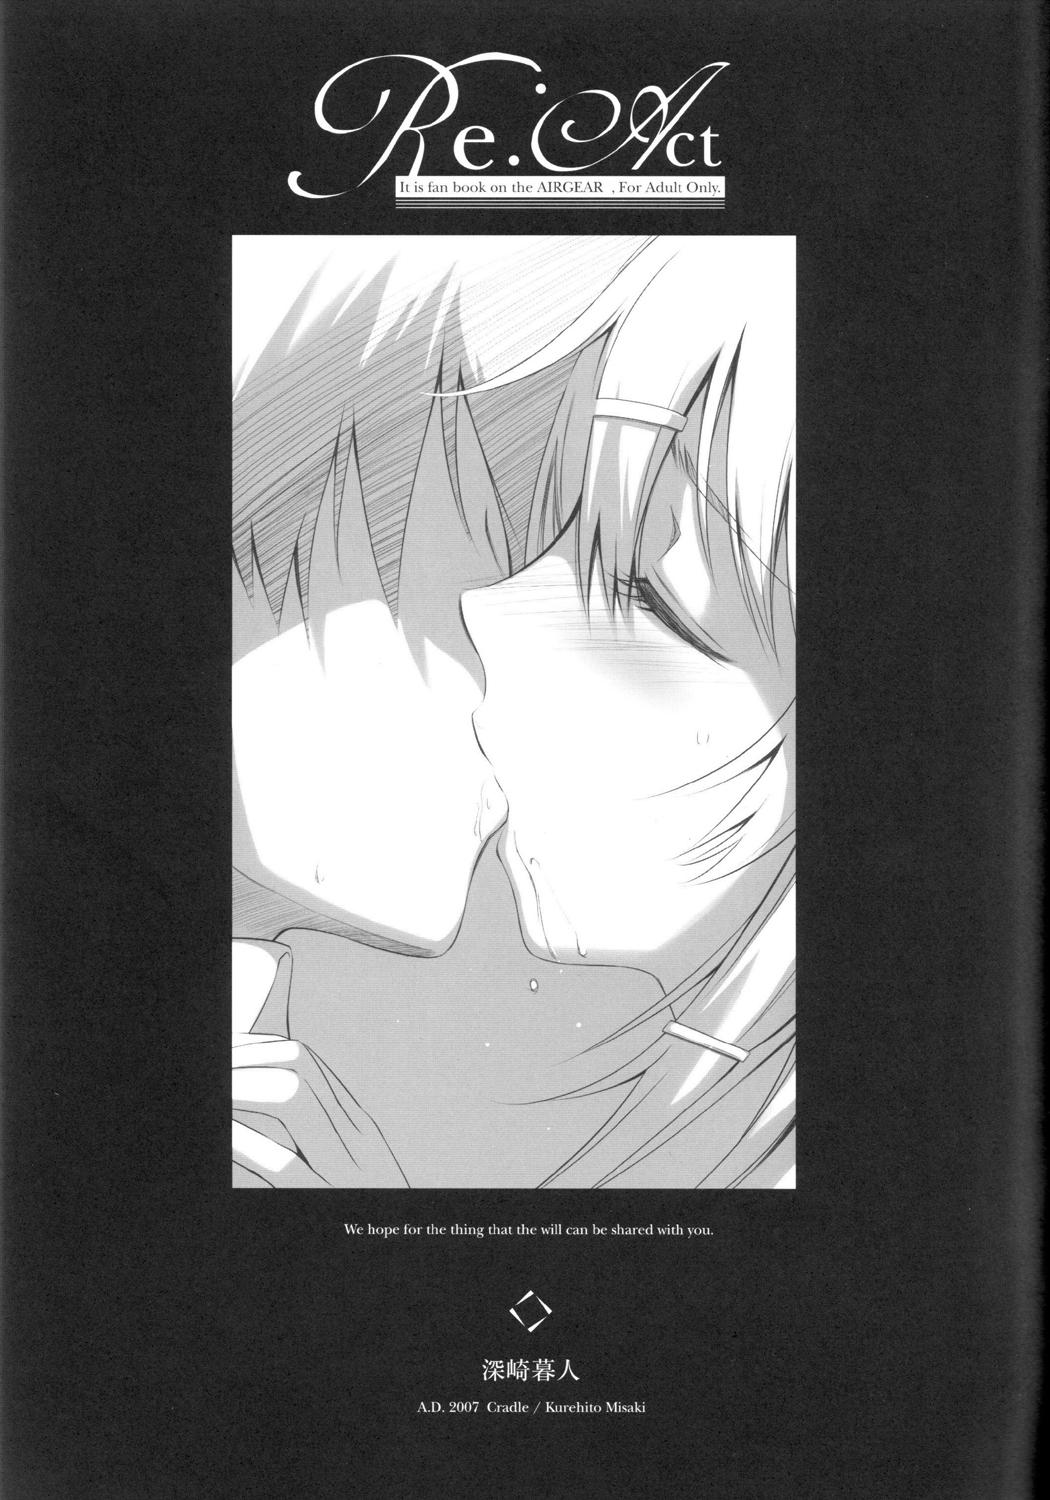 Anal Play Re:Act - Air gear Emo - Page 4